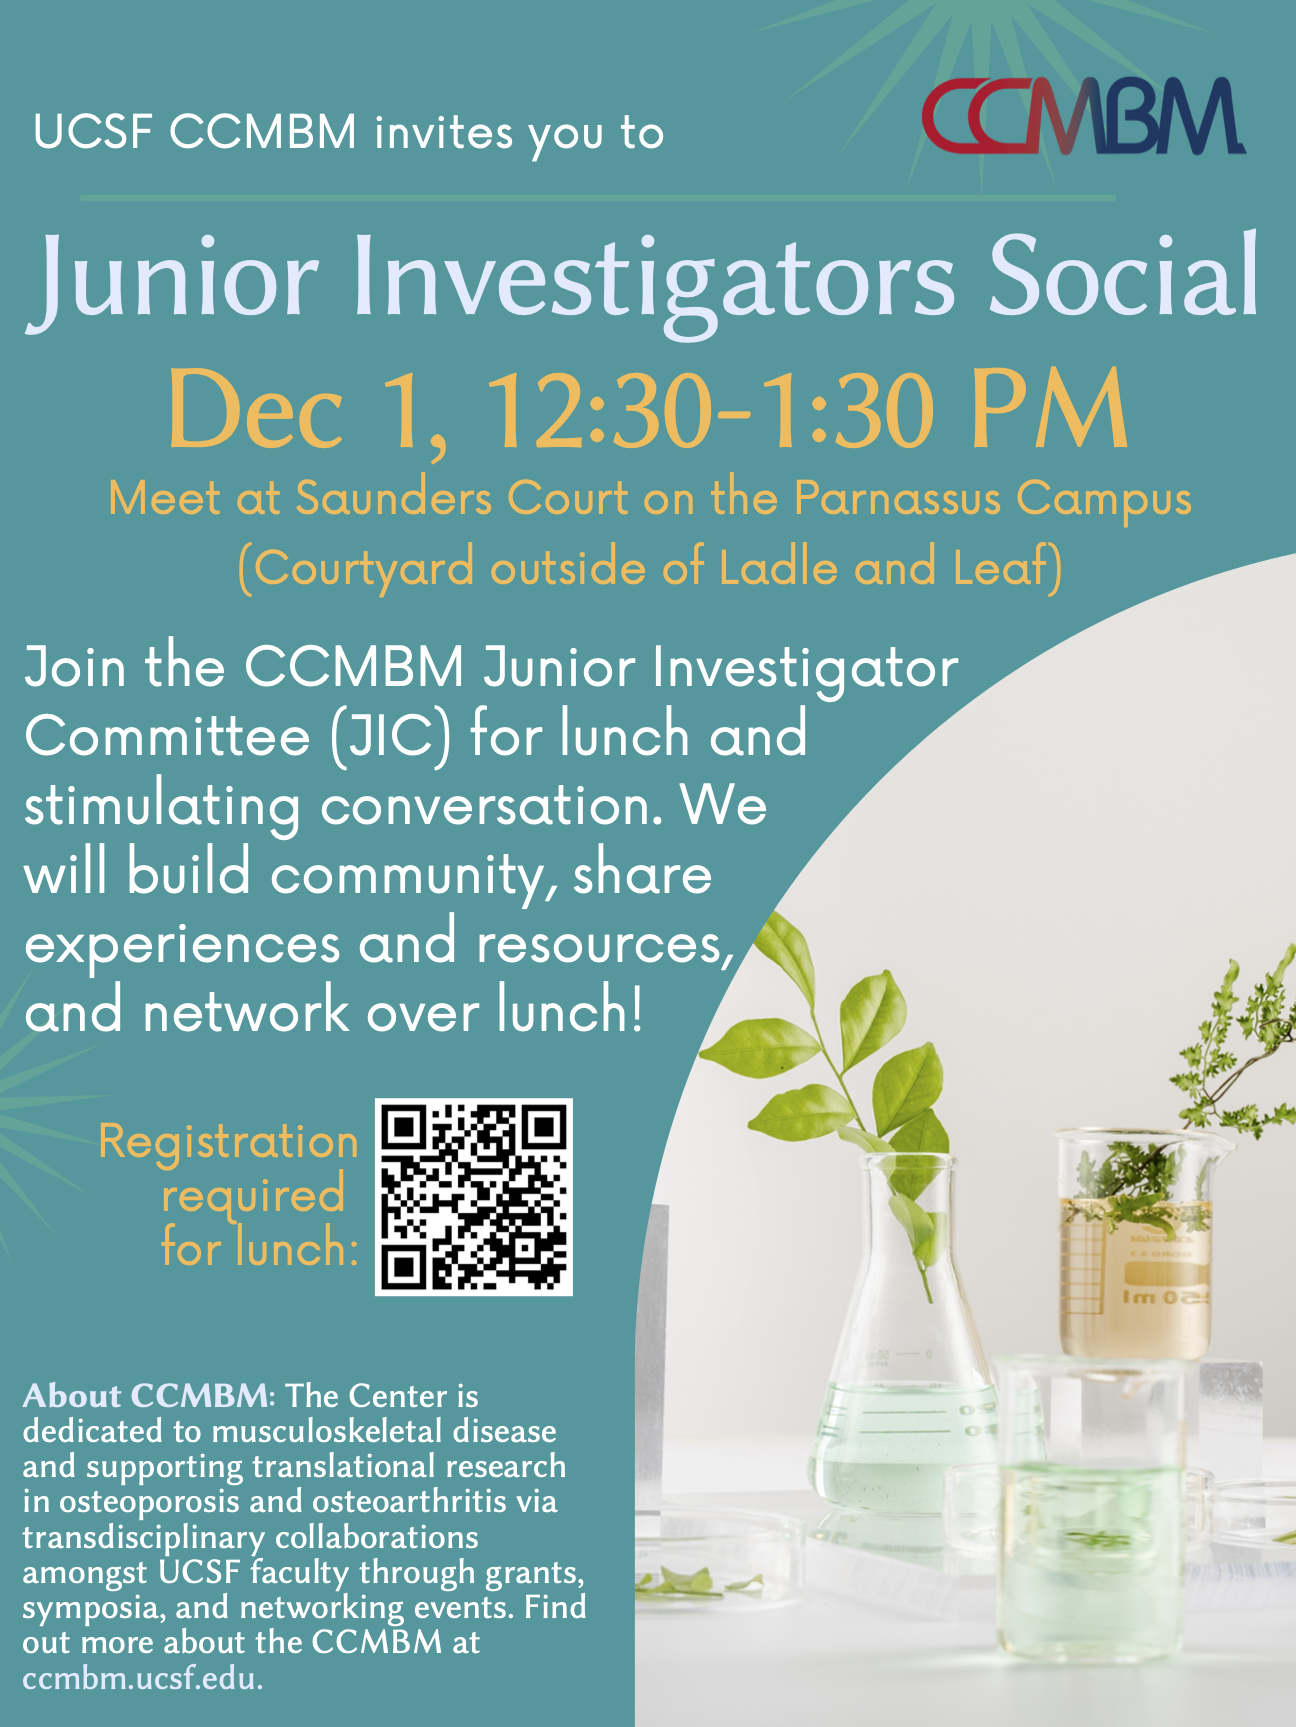 CCMBM Junior Investigator Committee Social event will be on November, 17, 2002, 12:30-1:30pm at Saunders Court on UCSF Parnassus Campus. Register at https://bit.ly/2022JICsocial